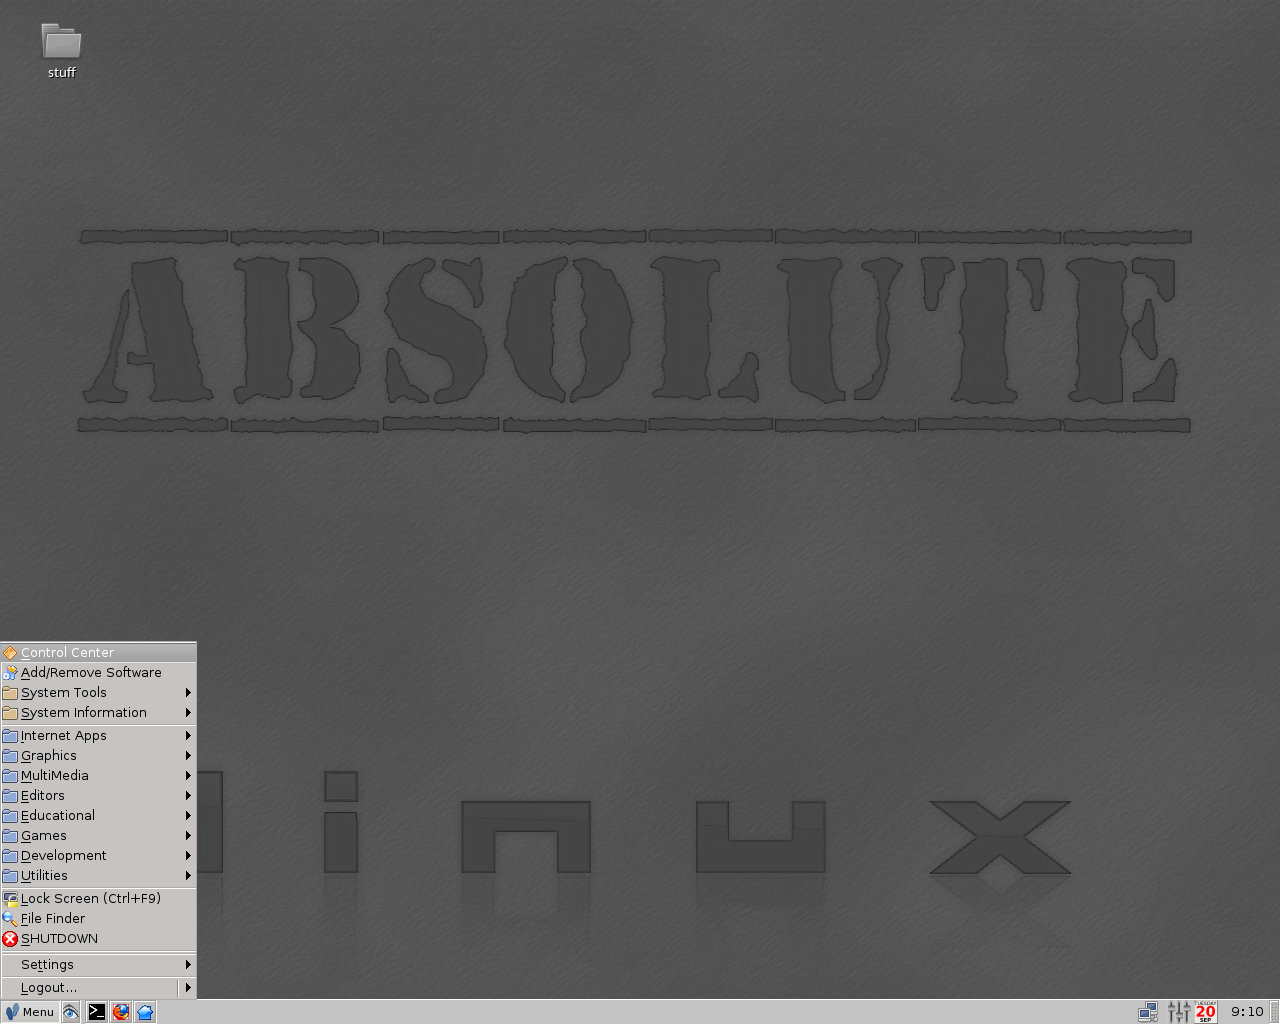 Absolute Linux 2020.11.07